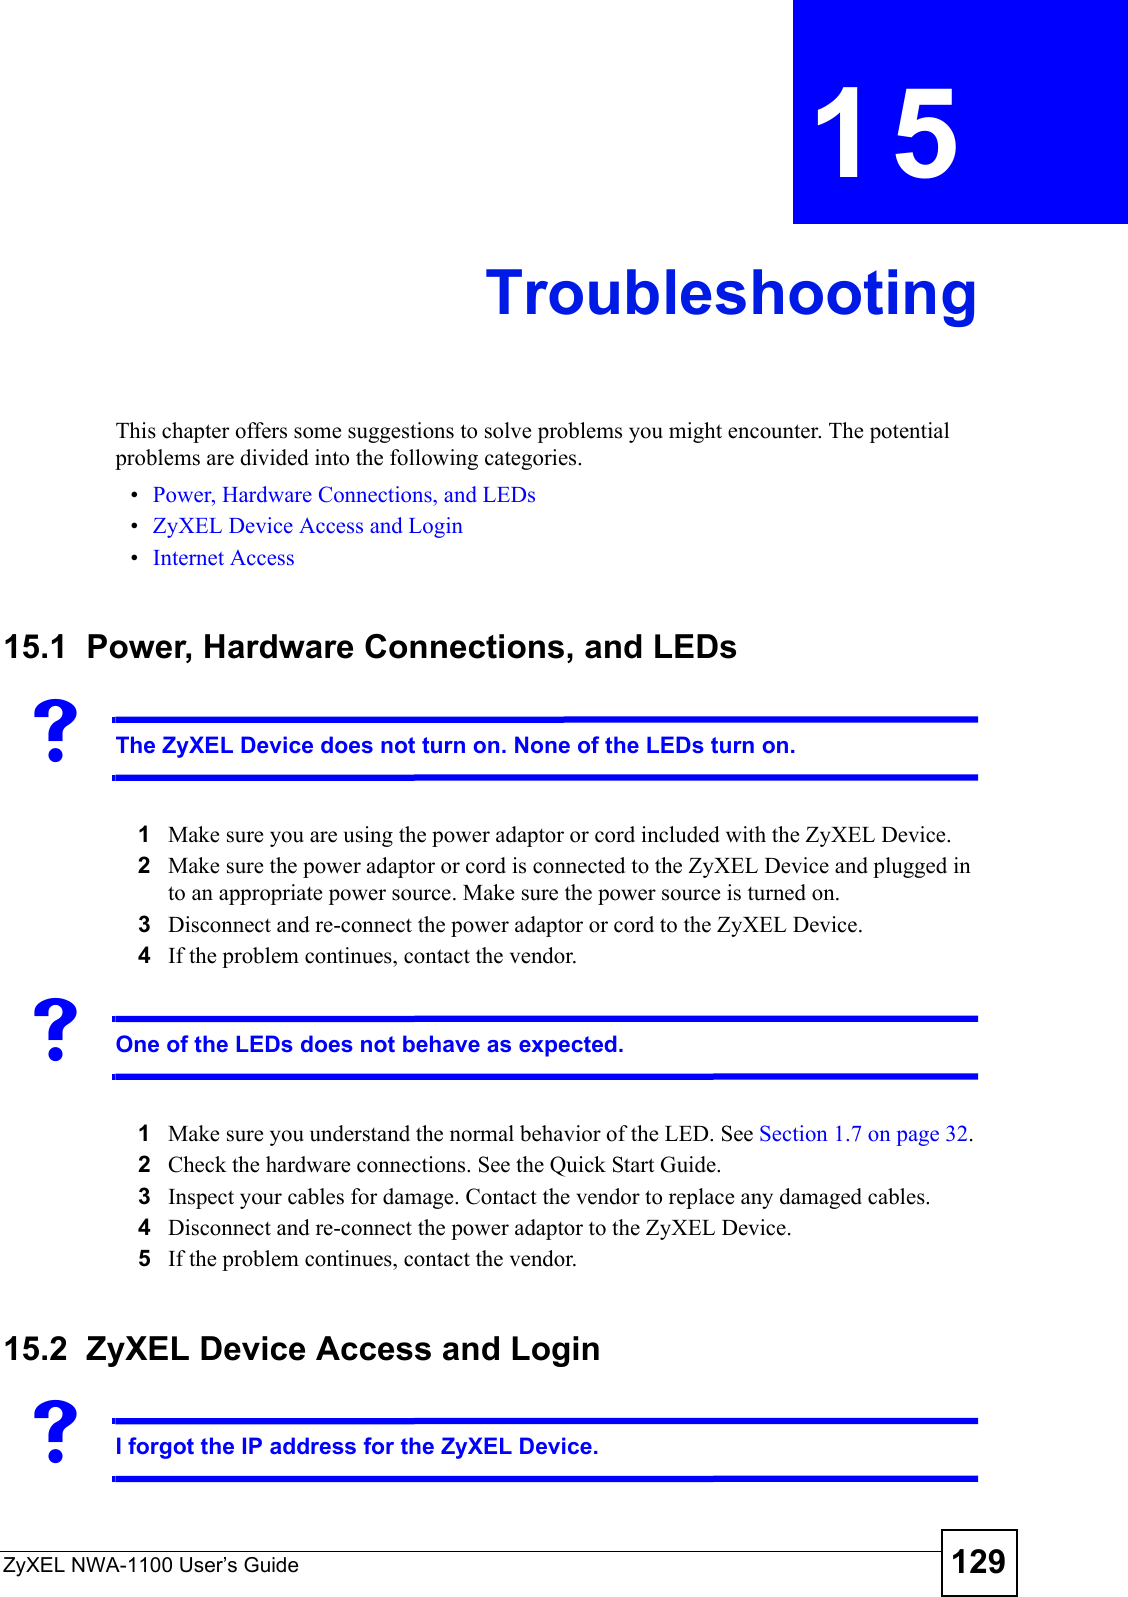 ZyXEL NWA-1100 User’s Guide 129CHAPTER  15 TroubleshootingThis chapter offers some suggestions to solve problems you might encounter. The potential problems are divided into the following categories.•Power, Hardware Connections, and LEDs•ZyXEL Device Access and Login•Internet Access15.1  Power, Hardware Connections, and LEDsVThe ZyXEL Device does not turn on. None of the LEDs turn on.1Make sure you are using the power adaptor or cord included with the ZyXEL Device.2Make sure the power adaptor or cord is connected to the ZyXEL Device and plugged in to an appropriate power source. Make sure the power source is turned on.3Disconnect and re-connect the power adaptor or cord to the ZyXEL Device. 4If the problem continues, contact the vendor.VOne of the LEDs does not behave as expected.1Make sure you understand the normal behavior of the LED. See Section 1.7 on page 32.2Check the hardware connections. See the Quick Start Guide.3Inspect your cables for damage. Contact the vendor to replace any damaged cables.4Disconnect and re-connect the power adaptor to the ZyXEL Device. 5If the problem continues, contact the vendor.15.2  ZyXEL Device Access and LoginVI forgot the IP address for the ZyXEL Device.